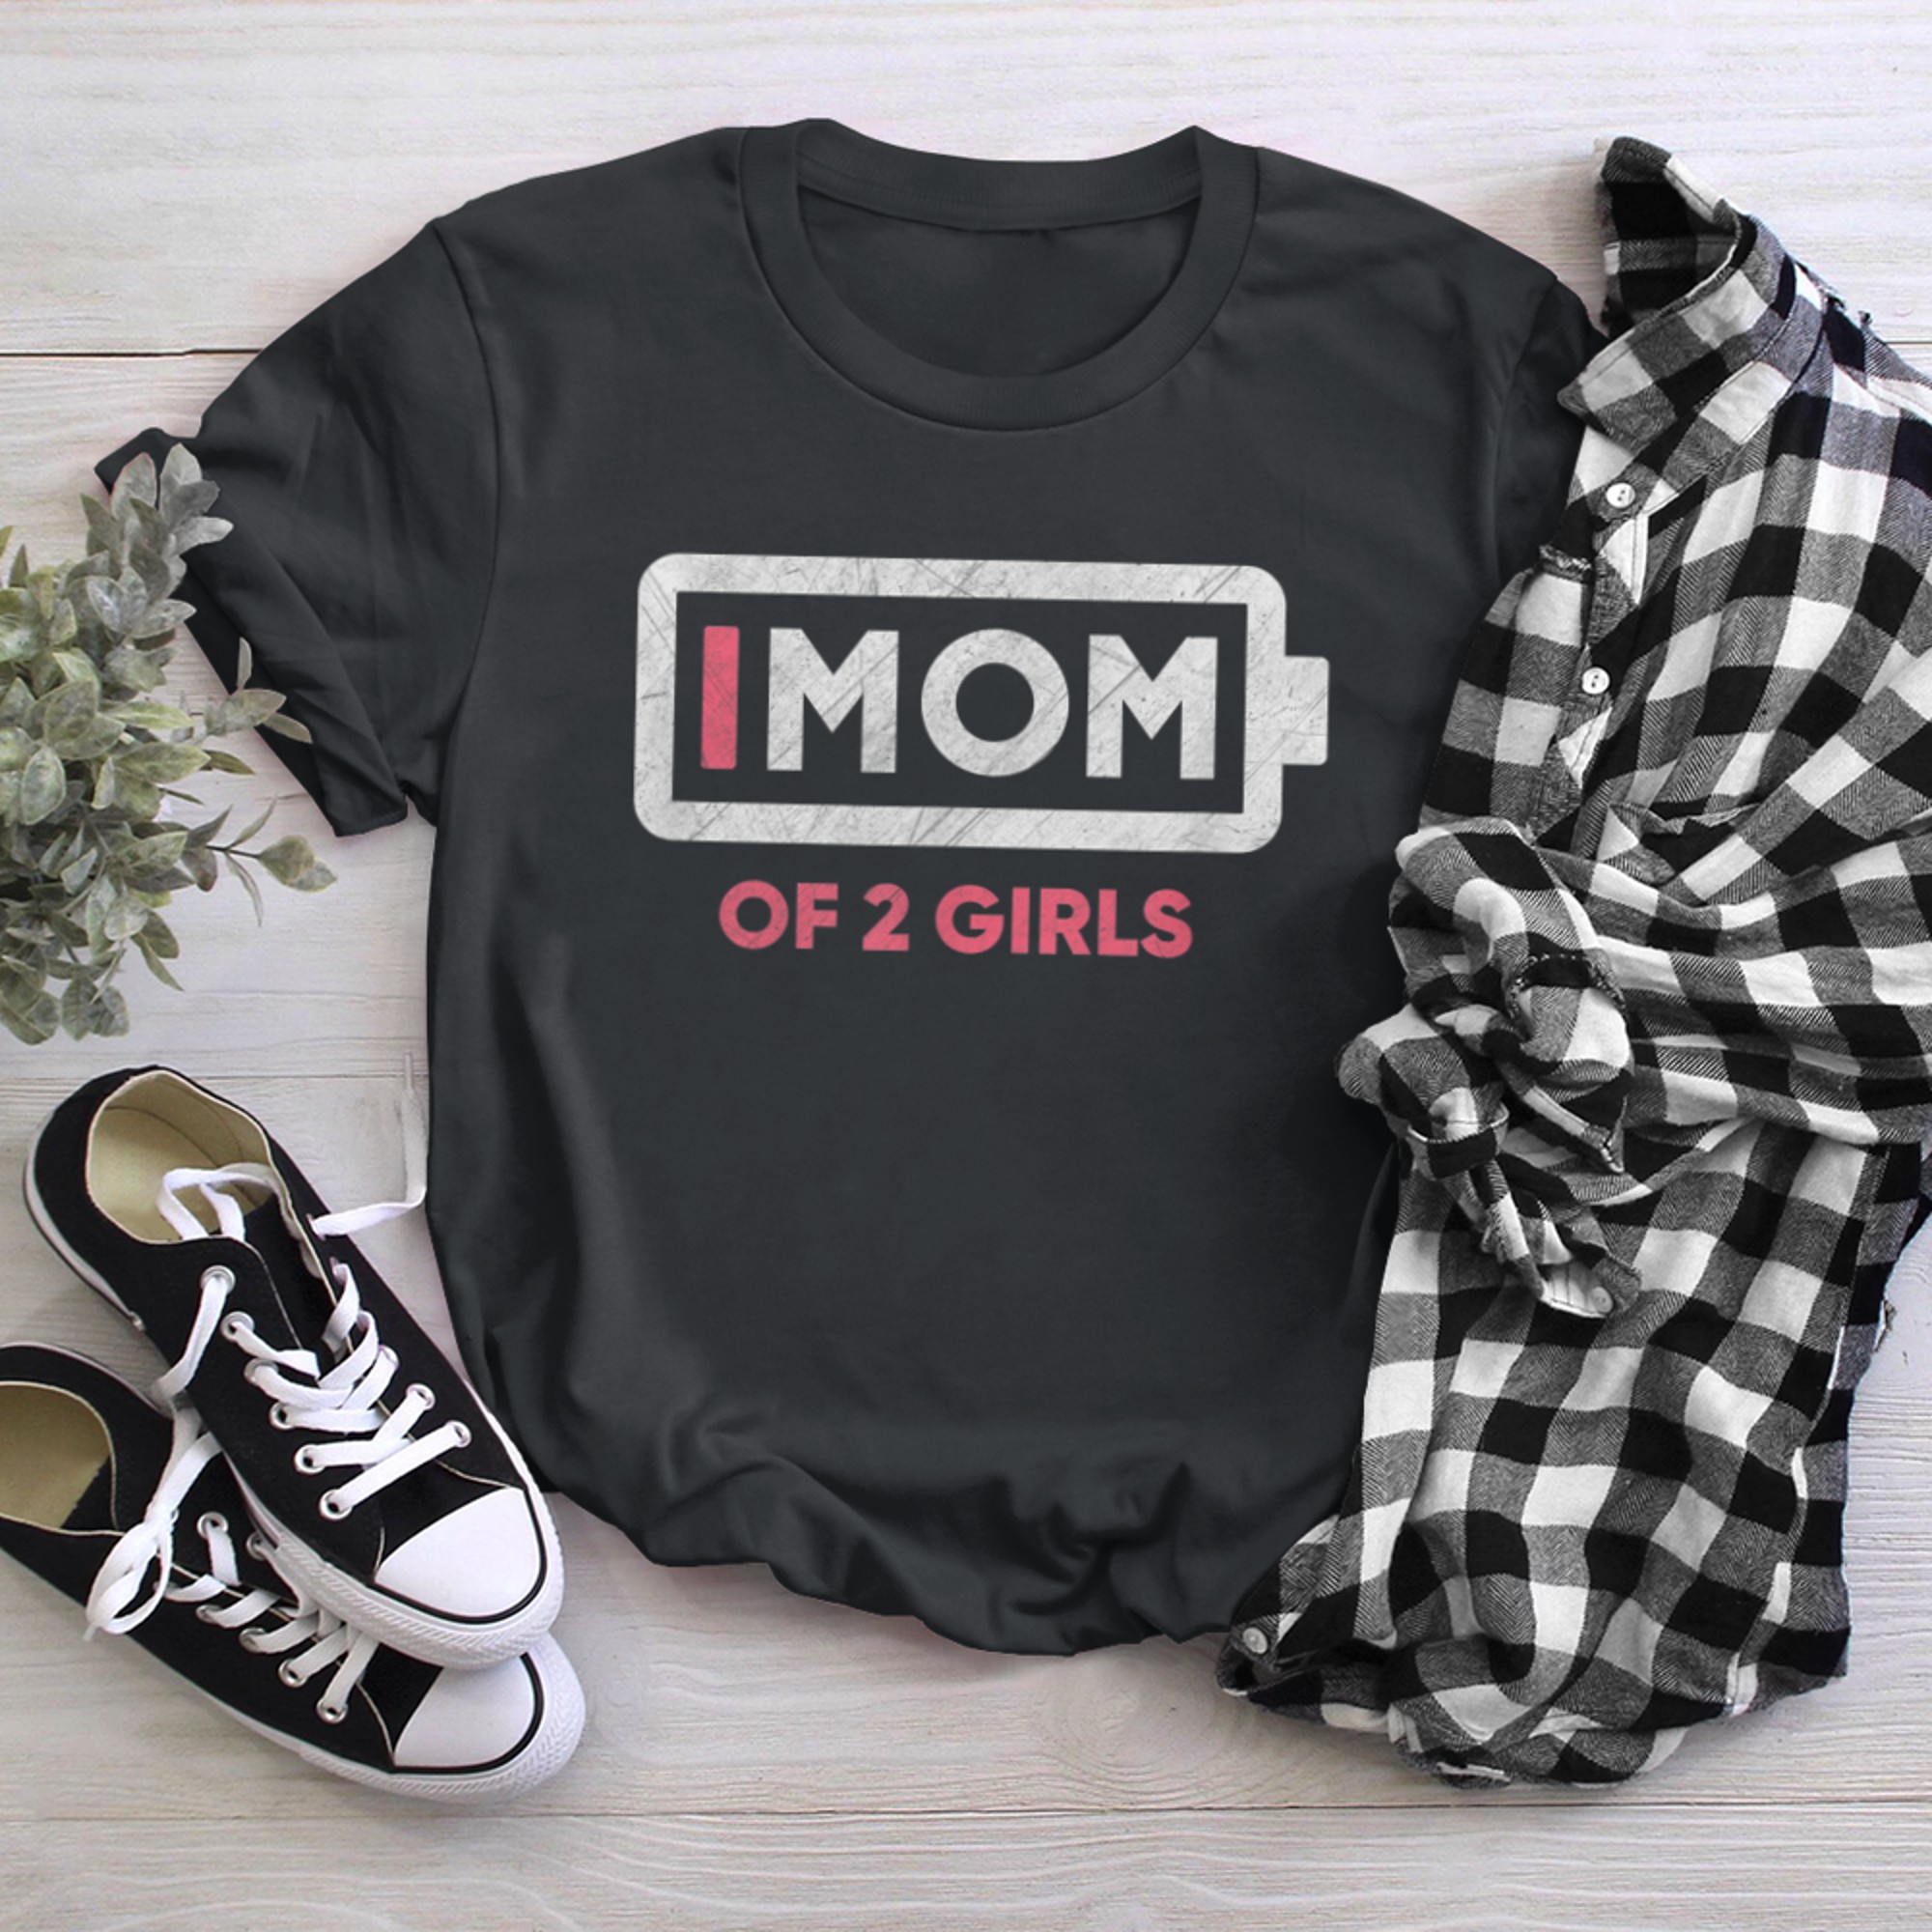 Mom of Mothers Day From Son  Mothers Day t-shirt black